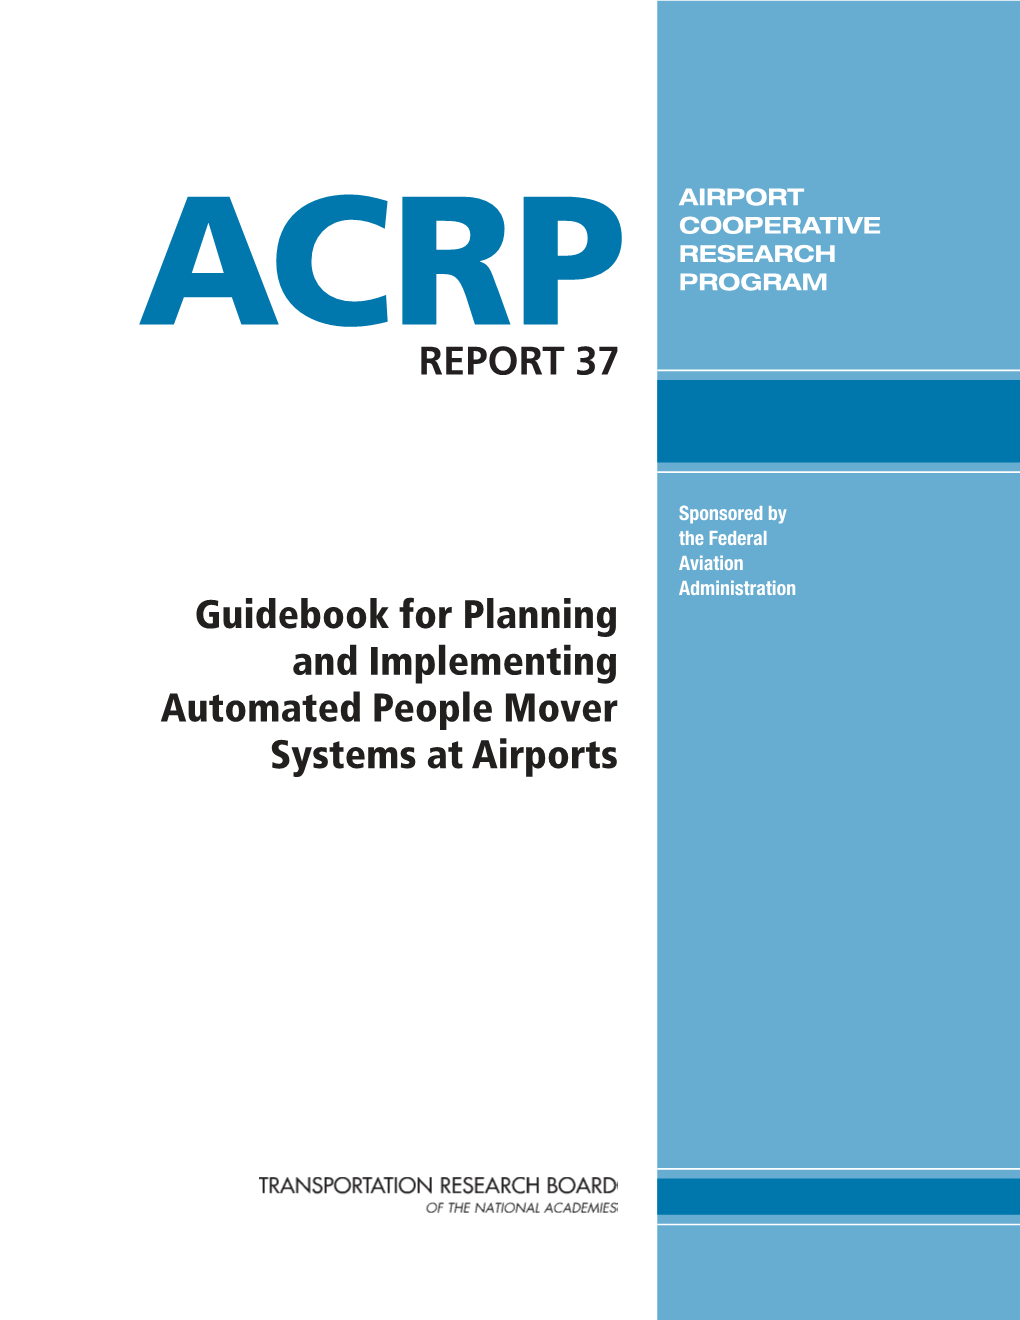 ACRP Report 37 – Guidebook for Planning and Implementing